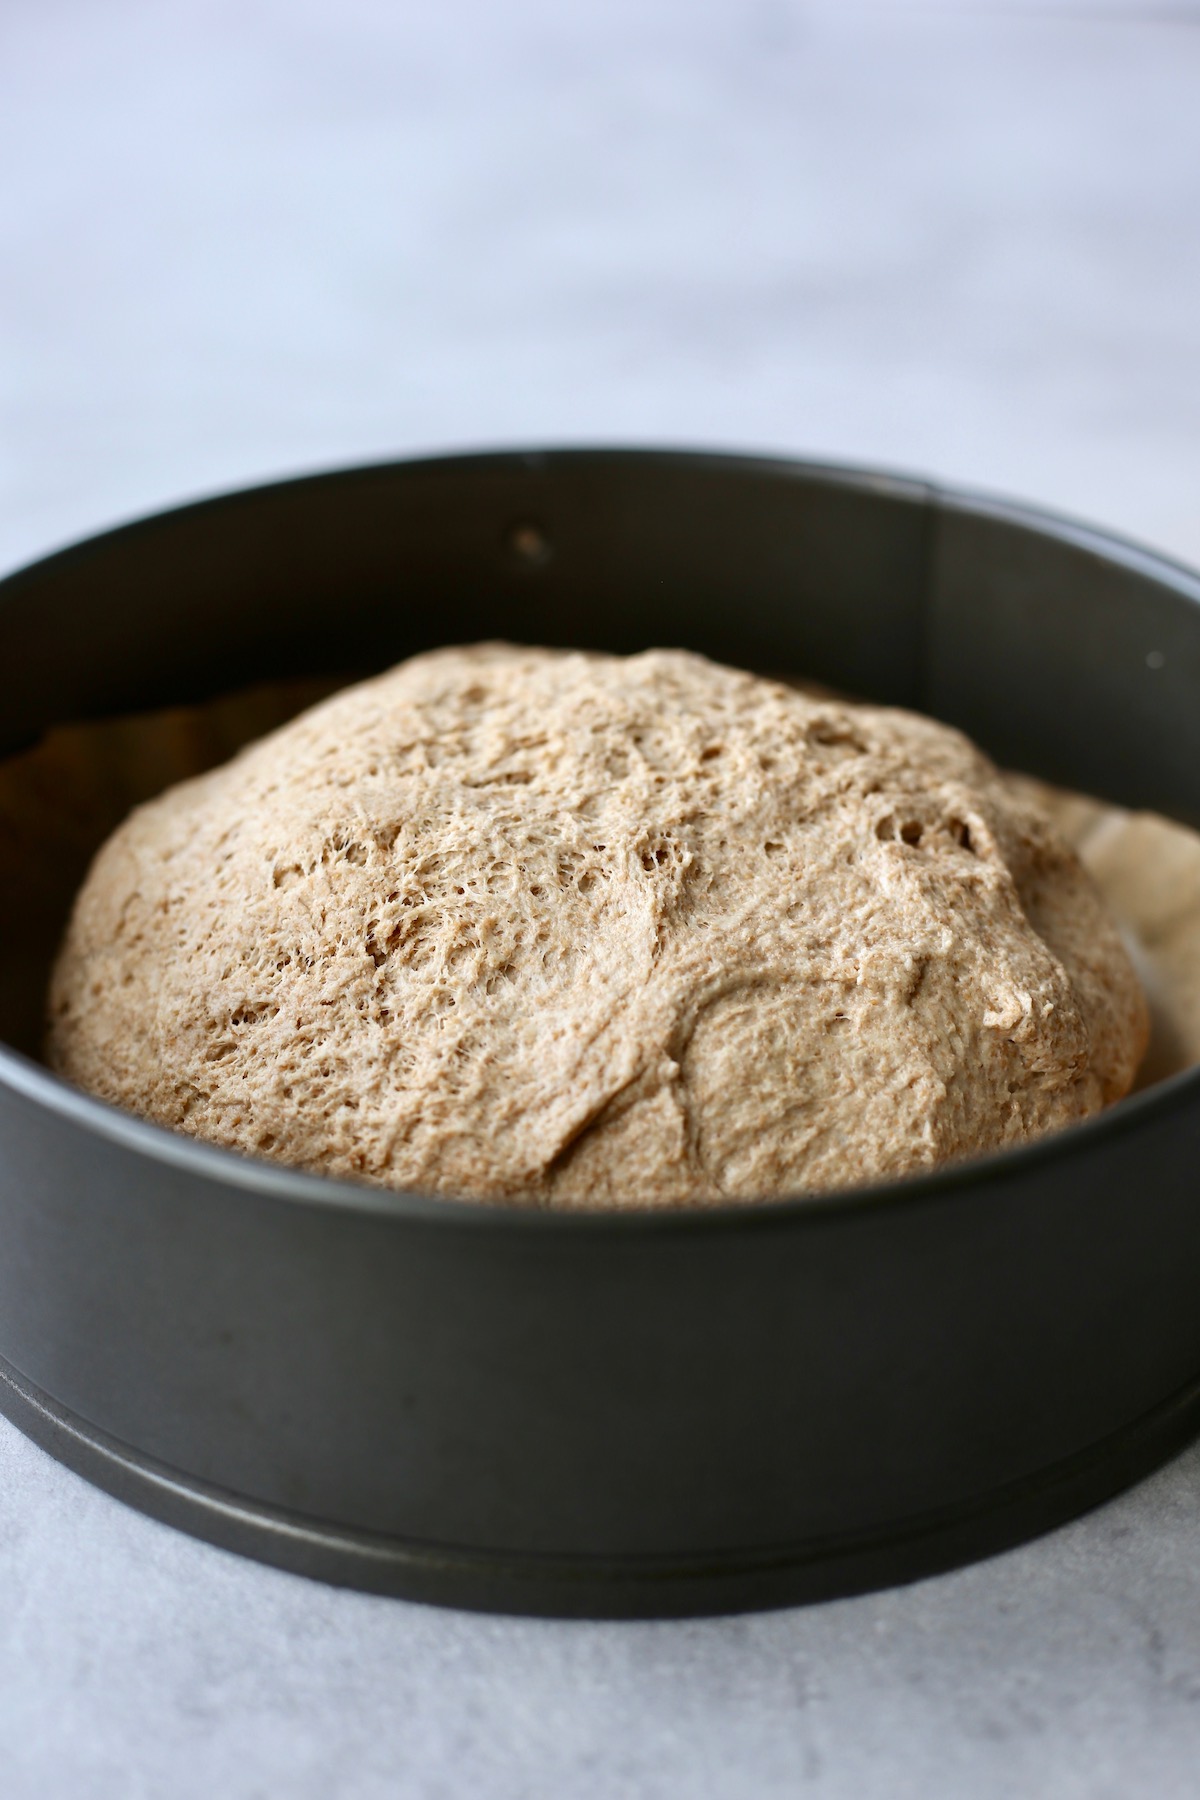 A large ball of whole wheat dough in a black cake pan.